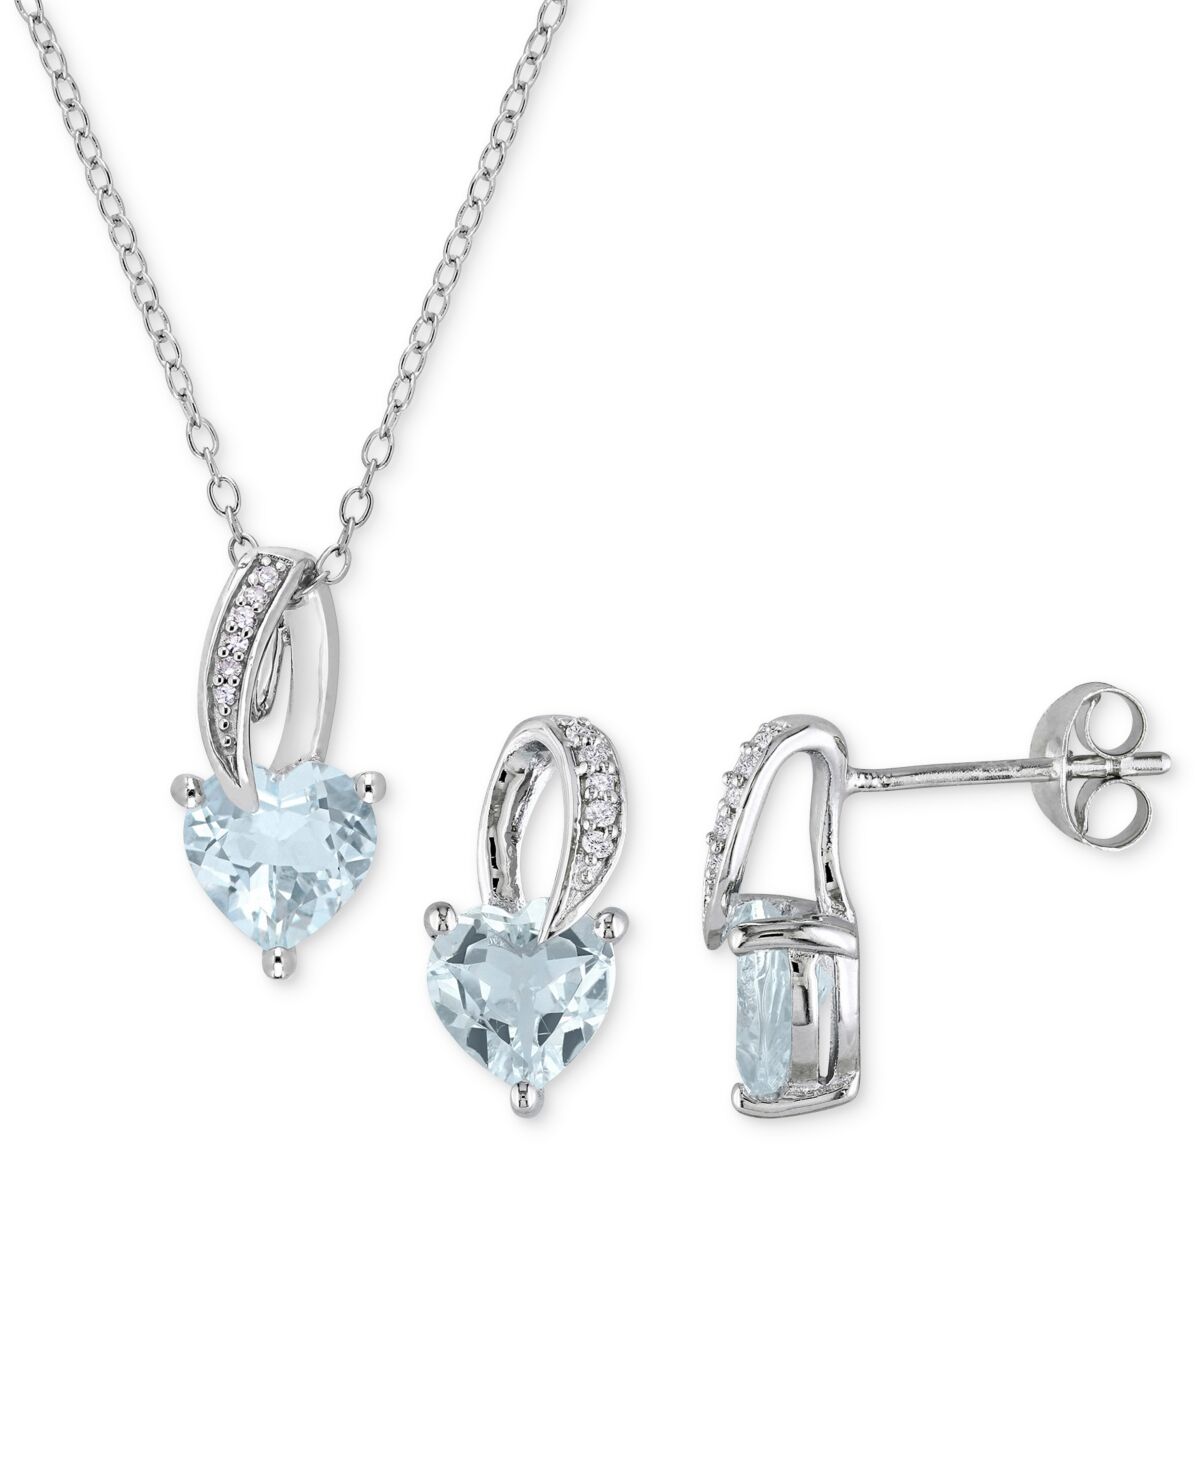 Macy's 2-Pc. Set Aquamarine (2-3/8 ct. t.w.) & Diamond (1/20 ct. t.w.) Heart Pendant Necklace & Matching Stud Earrings in Sterling Silver - AQUAMARINE